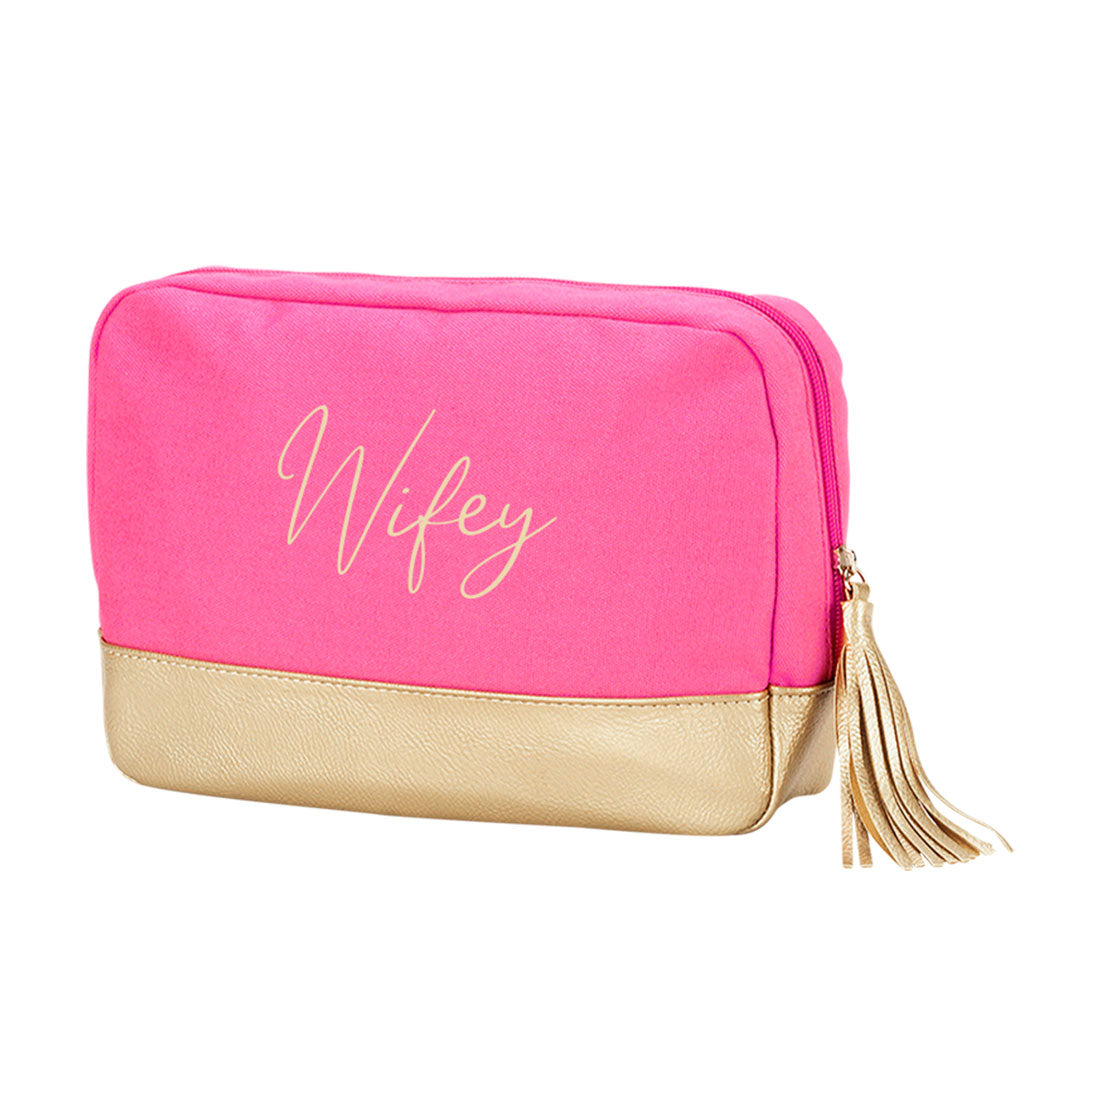 Wifey Embroidered Hot Pink Cabana Cosmetic Bag